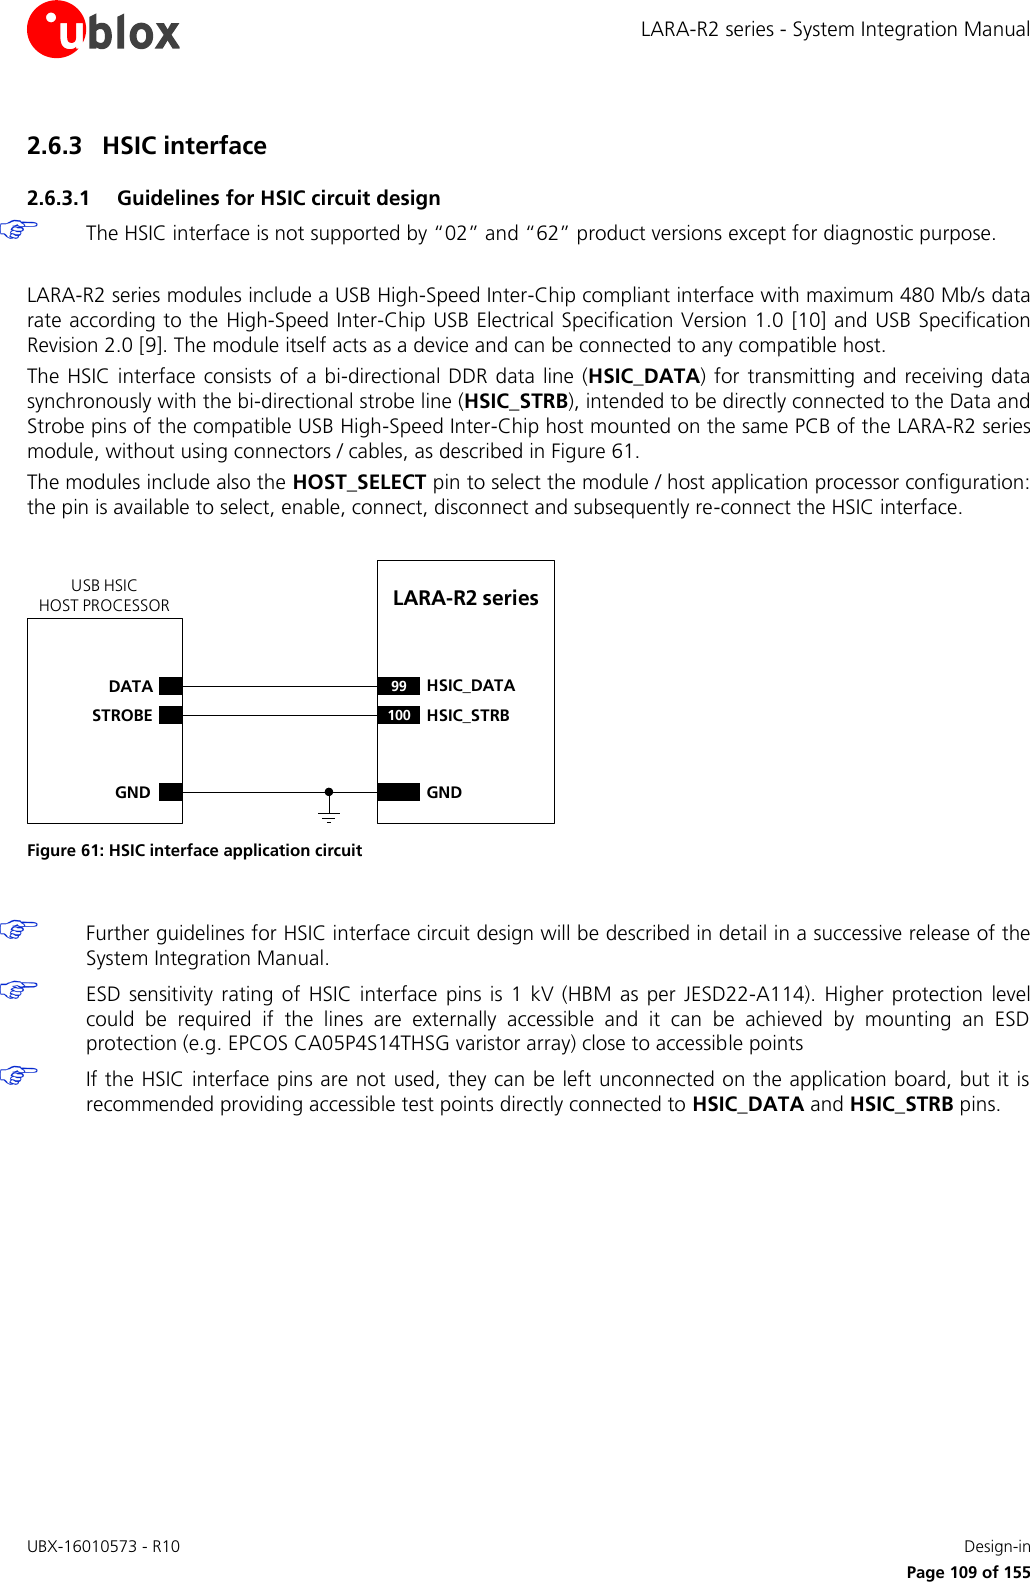 LARA-R2 series - System Integration Manual UBX-16010573 - R10    Design-in     Page 109 of 155 2.6.3 HSIC interface 2.6.3.1 Guidelines for HSIC circuit design  The HSIC interface is not supported by “02” and “62” product versions except for diagnostic purpose.  LARA-R2 series modules include a USB High-Speed Inter-Chip compliant interface with maximum 480 Mb/s data rate according to the High-Speed Inter-Chip USB Electrical Specification Version 1.0 [10] and USB Specification Revision 2.0 [9]. The module itself acts as a device and can be connected to any compatible host. The HSIC interface consists of  a bi-directional DDR data  line  (HSIC_DATA) for transmitting and receiving data synchronously with the bi-directional strobe line (HSIC_STRB), intended to be directly connected to the Data and Strobe pins of the compatible USB High-Speed Inter-Chip host mounted on the same PCB of the LARA-R2 series module, without using connectors / cables, as described in Figure 61. The modules include also the HOST_SELECT pin to select the module / host application processor configuration: the pin is available to select, enable, connect, disconnect and subsequently re-connect the HSIC interface.  LARA-R2 series DATASTROBEGND99 HSIC_DATA100 HSIC_STRBGNDUSB HSICHOST PROCESSOR Figure 61: HSIC interface application circuit   Further guidelines for HSIC interface circuit design will be described in detail in a successive release of the System Integration Manual.  ESD  sensitivity rating  of  HSIC  interface  pins  is 1  kV (HBM  as  per  JESD22-A114).  Higher  protection  level could  be  required  if  the  lines  are  externally  accessible  and  it  can  be  achieved  by  mounting  an  ESD protection (e.g. EPCOS CA05P4S14THSG varistor array) close to accessible points  If the HSIC interface pins are not used, they can be left unconnected on the application board, but it is recommended providing accessible test points directly connected to HSIC_DATA and HSIC_STRB pins.  